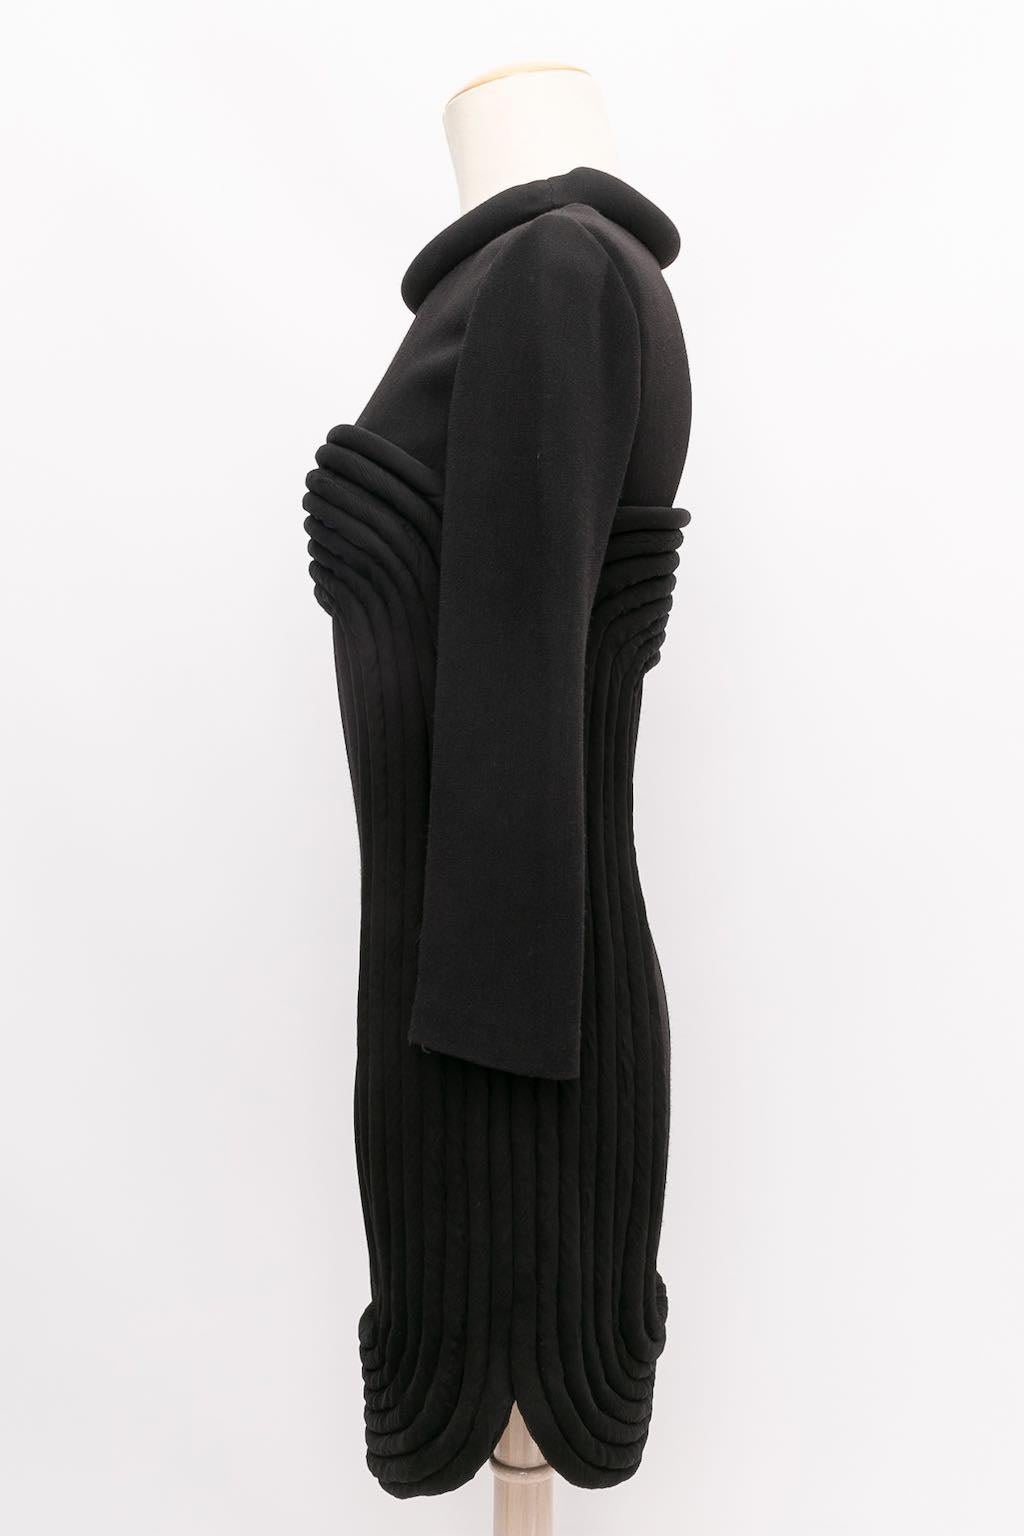 Balmain - Dress composed of wool and silk. No composition or size tag, it fits a size 36FR/38FR.

Additional information: 
Dimensions: Shoulders: 41 cm (16.14